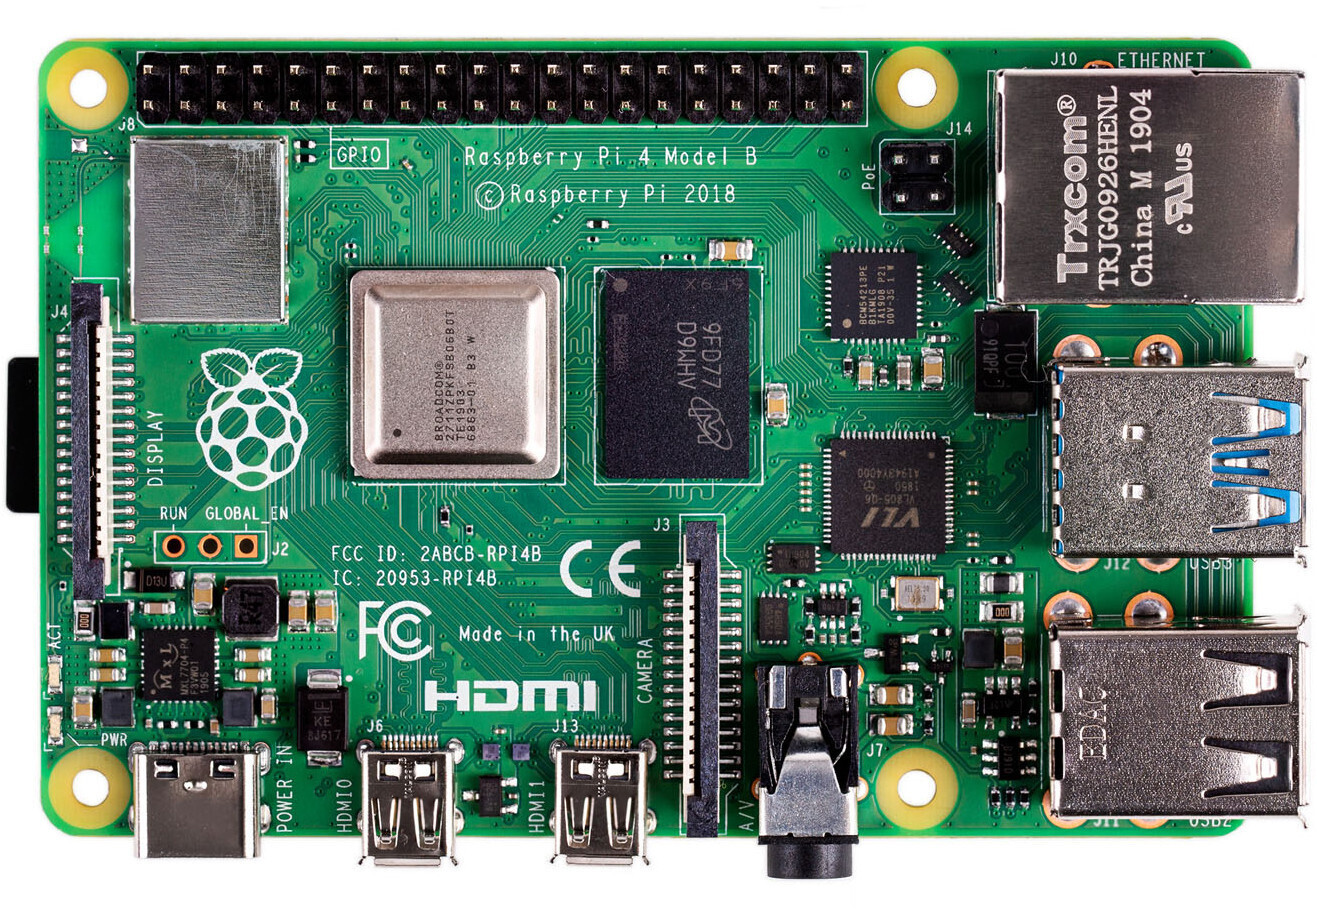 Buy Raspberry Pi 4 Model B from £55.49 (Today) – Best Deals on